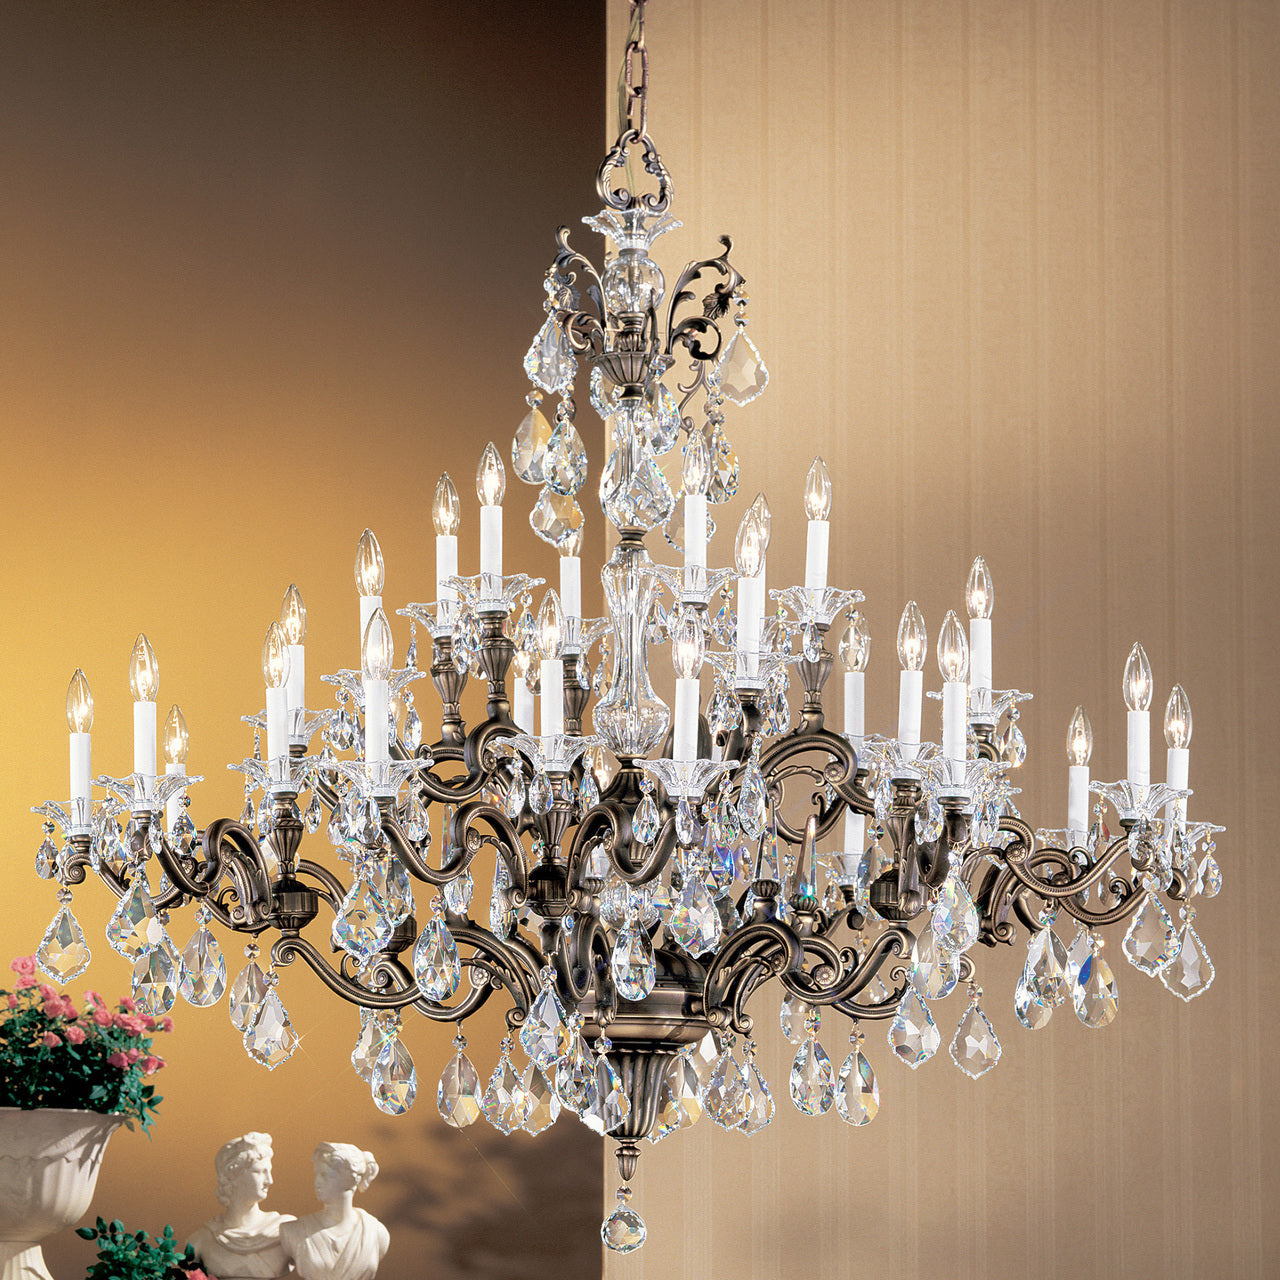 Classic Lighting 57130 RB IRA Via Firenze Crystal Chandelier in Roman Bronze (Imported from Spain)